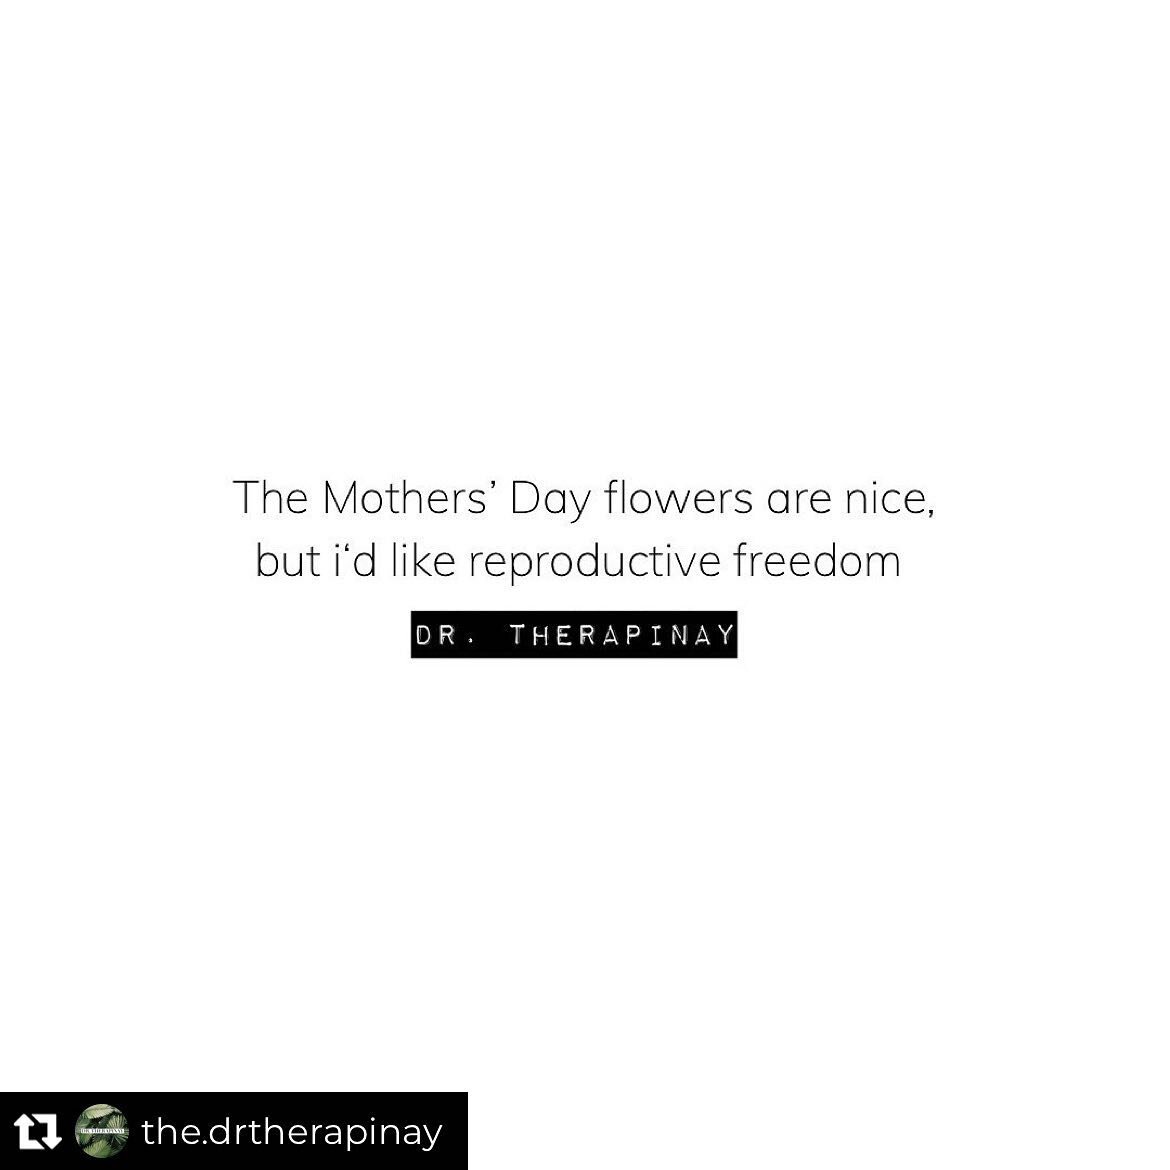 to all those mothering out there: we celebrate you! you deserve all the cinnamon rolls, flowers, AND systemic change. #radicalparenting #motheringisaverb